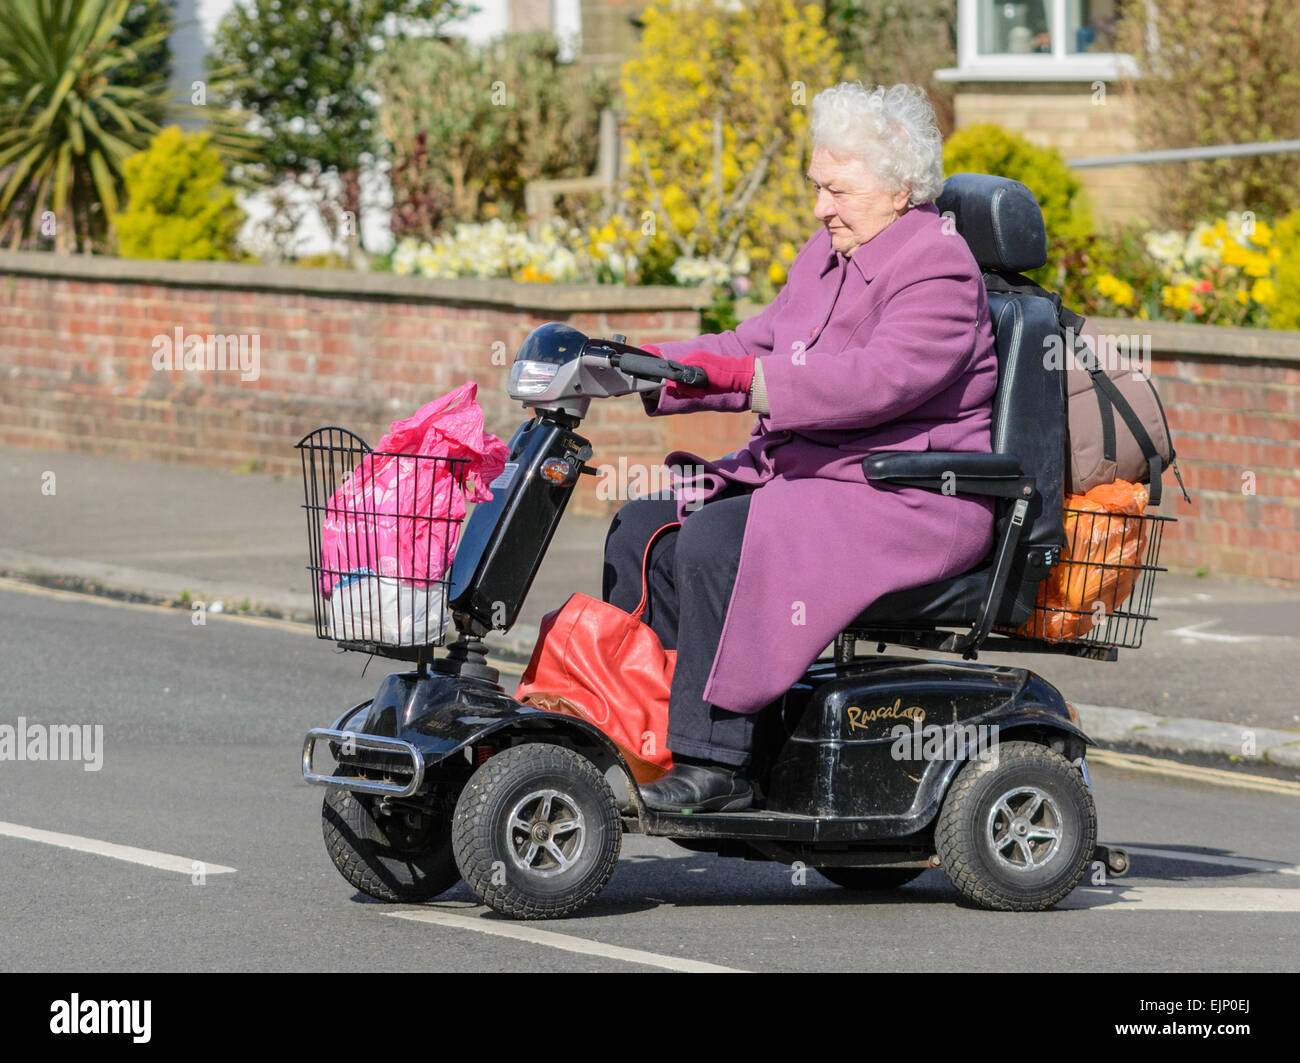 Mobility scooter. Senior woman riding a mobility scooter across a road carrying shopping bags in England, UK. Stock Photo